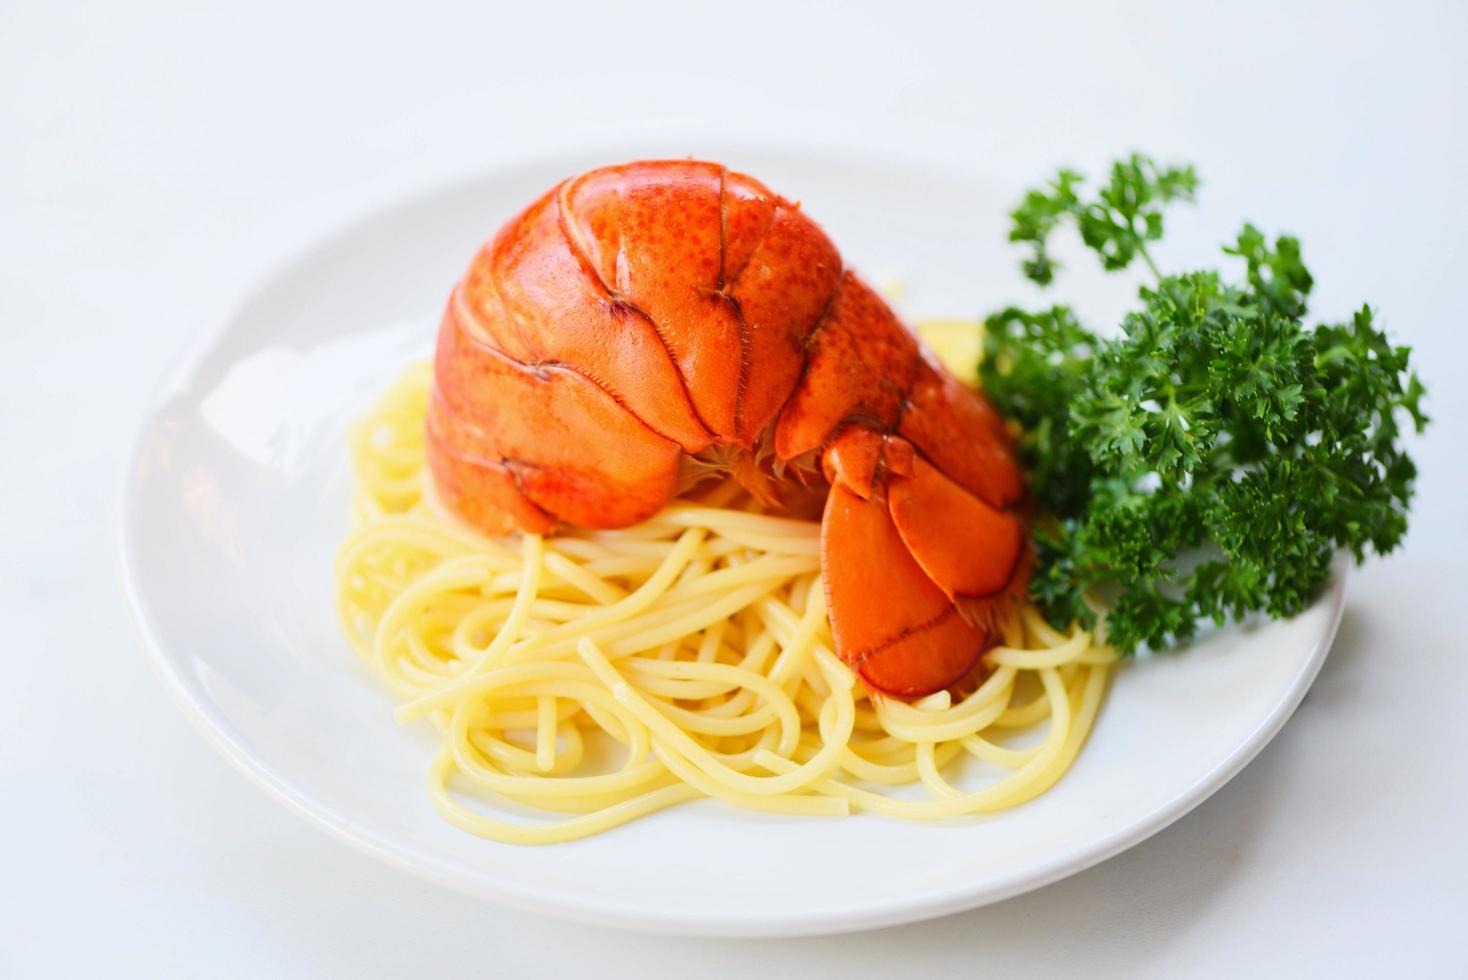 Boiled lobster tail cooked spaghetti seafood lobster food on a white plate photo